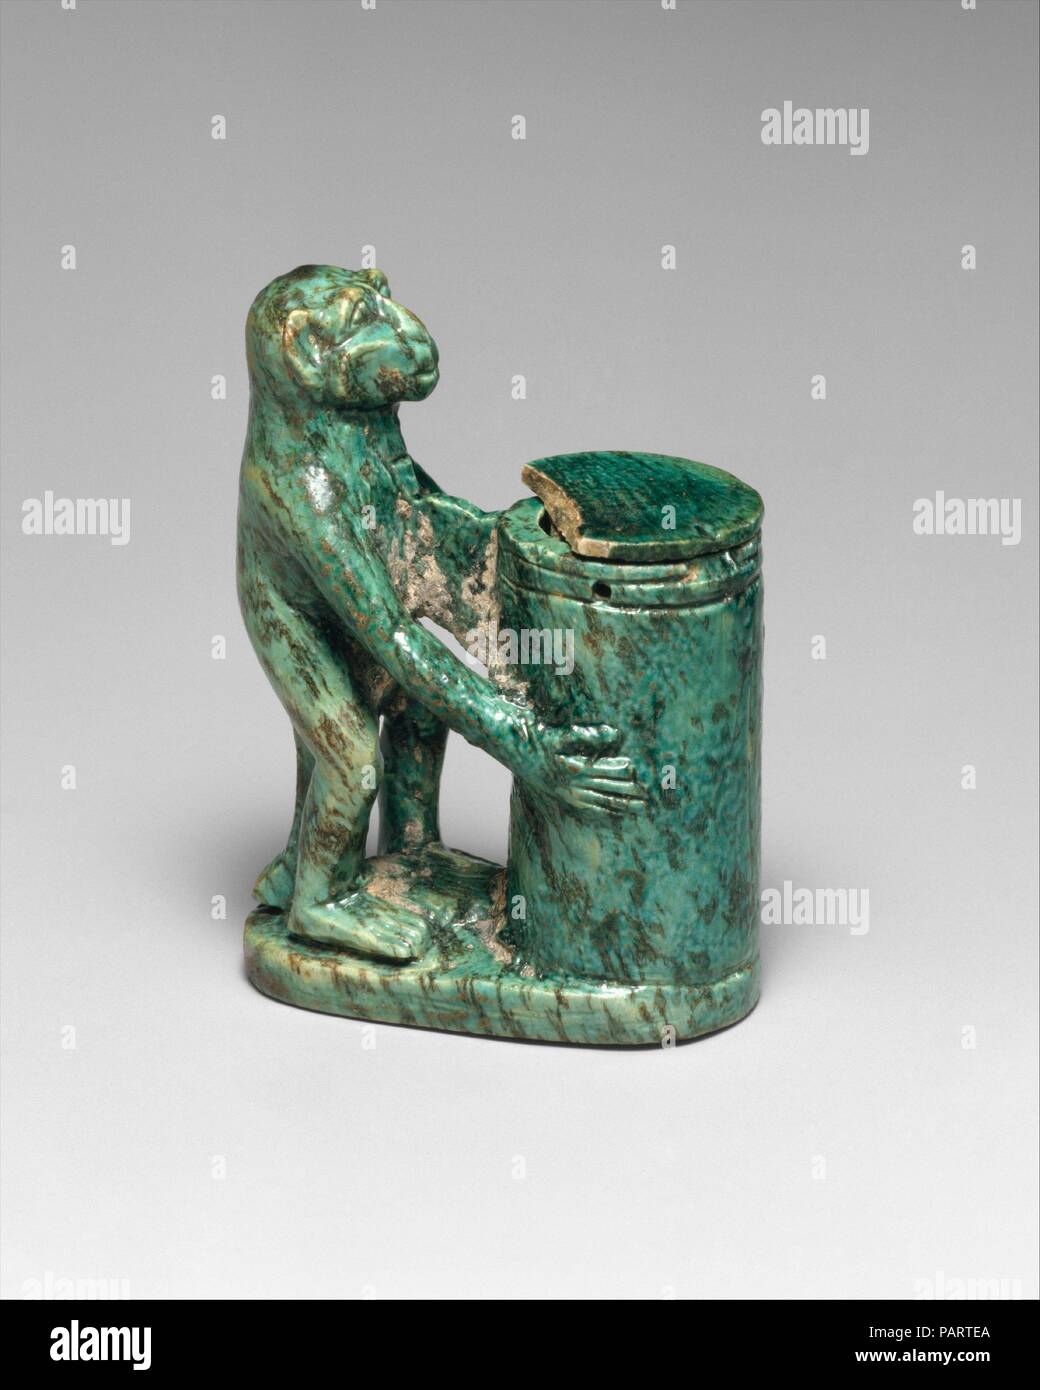 Kohl Tube in the Shape of a Monkey Holding a Vessel. Dimensions: h. 6 cm (2 3/8 in); w. 4.1 cm (1 5/8 in). Dynasty: Dynasty 18, early. Date: ca. 1550-1450 B.C..  The Egyptians' use of eye cosmetics to enhance beauty and for prophylactic purposes is well documented both in artistic representations and by the cosmetic vessels that have been preserved from the earliest times. The most common substance utilized in the New Kingdom was kohl, a dark gray powder made from galena. Kohl was frequently stored in decorated tubes with long, slim sticks made of polished wood or stone as applicators. As in e Stock Photo